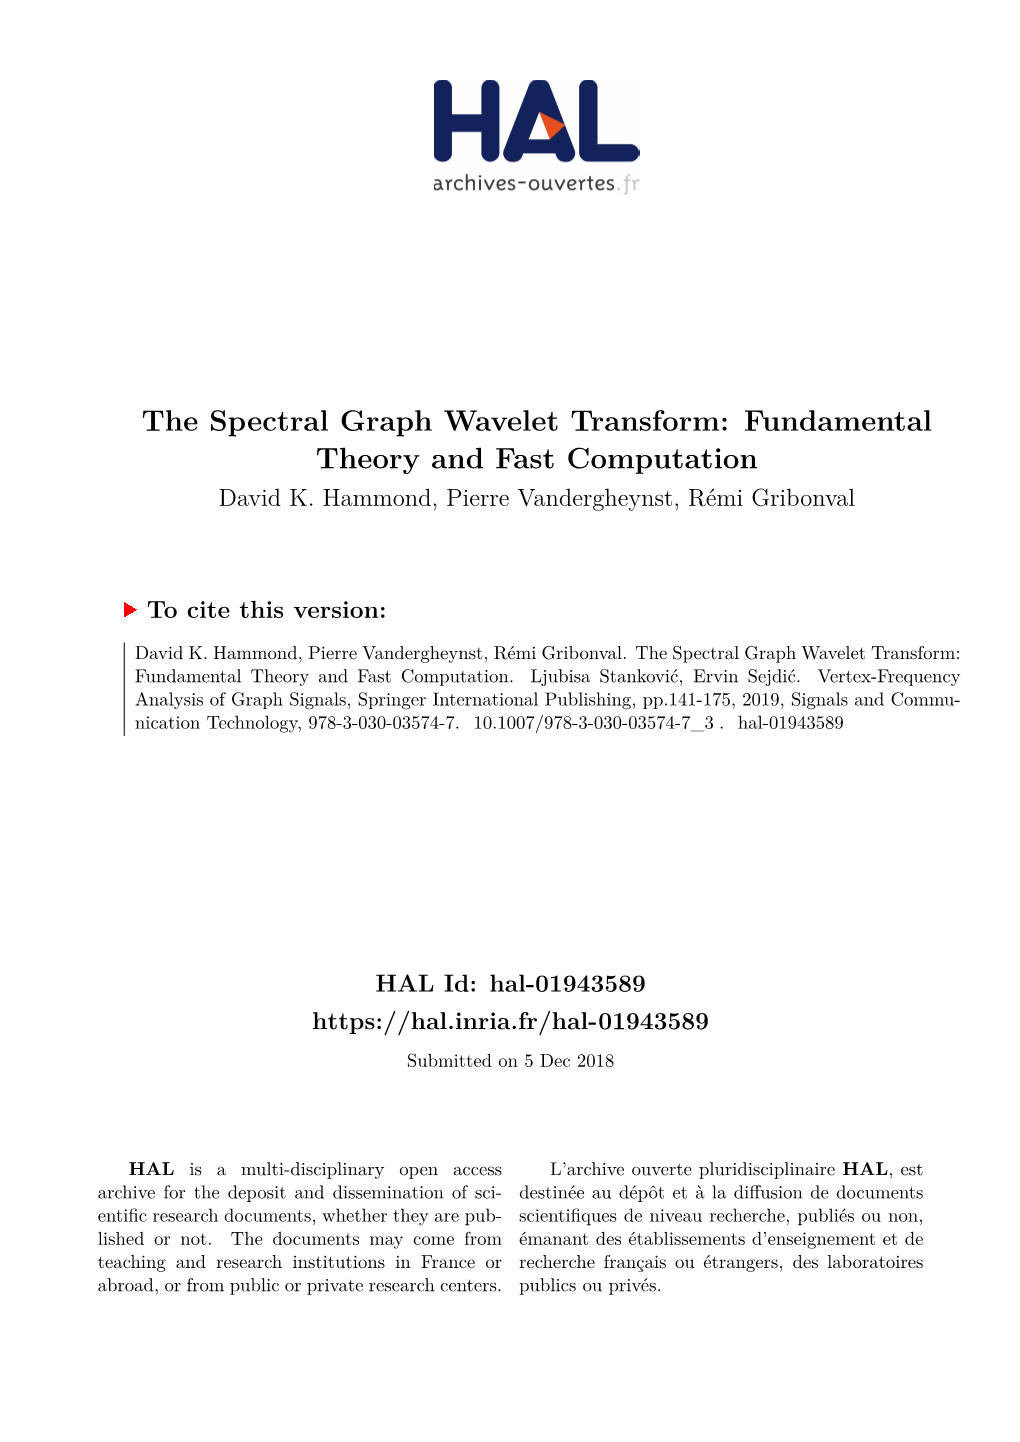 The Spectral Graph Wavelet Transform: Fundamental Theory and Fast Computation David K